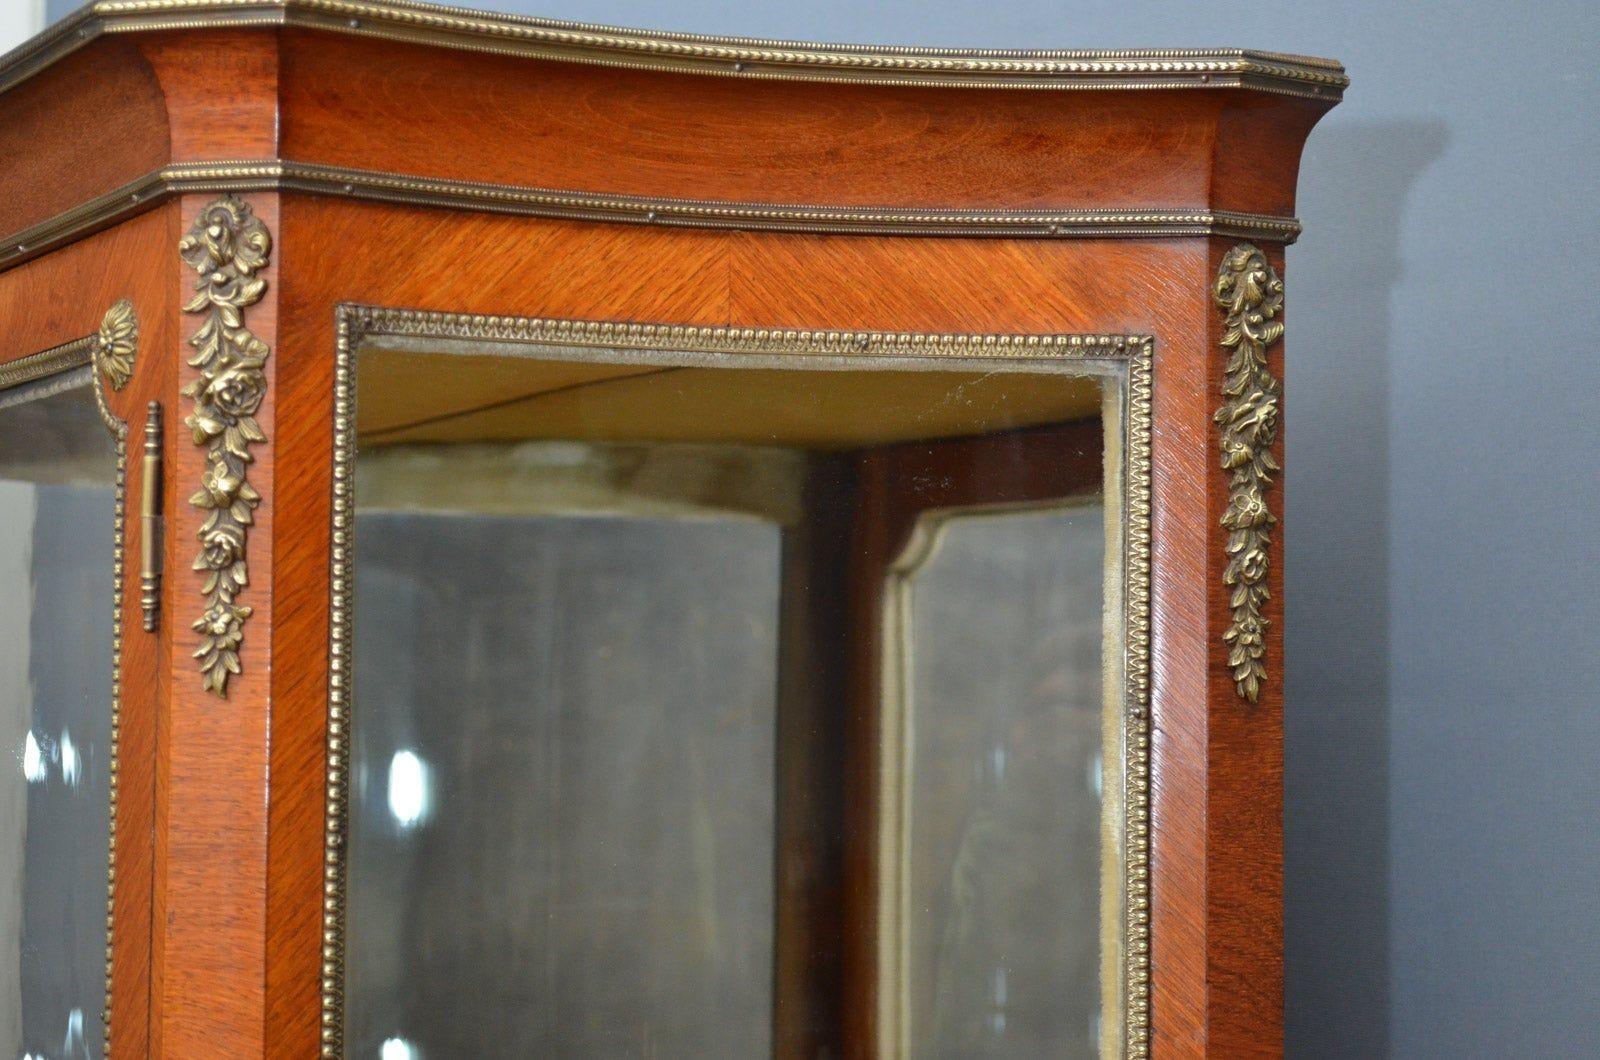 Sn4193 A XIXth century tulipwood and rosewood vitrine, having glazed door with parquetry inlaid panel enclosing 3 shelves and flanked by concave glass sides, all with fine quality ormolu and brass embellishments, standing on cabriole legs with